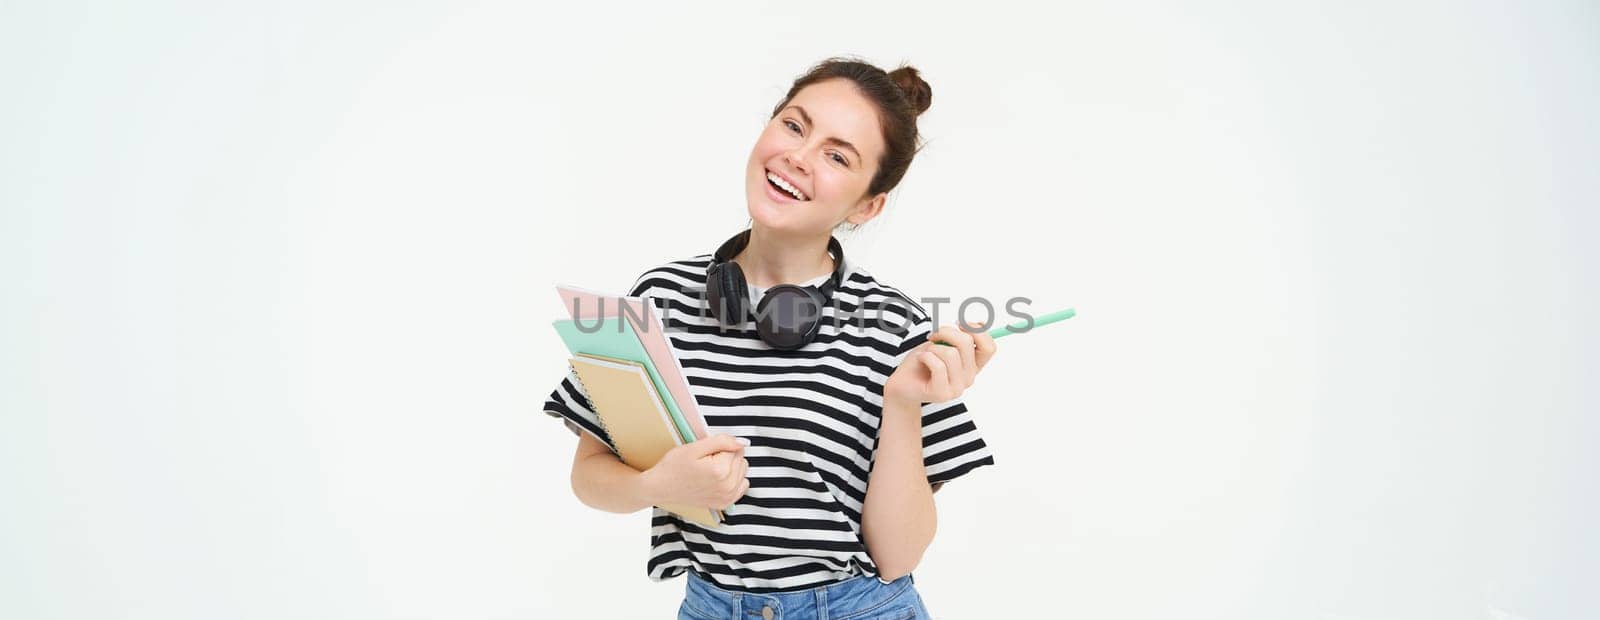 Portrait of young woman, student with notebooks and earphones on her neck, posing for college advertisement, white background by Benzoix